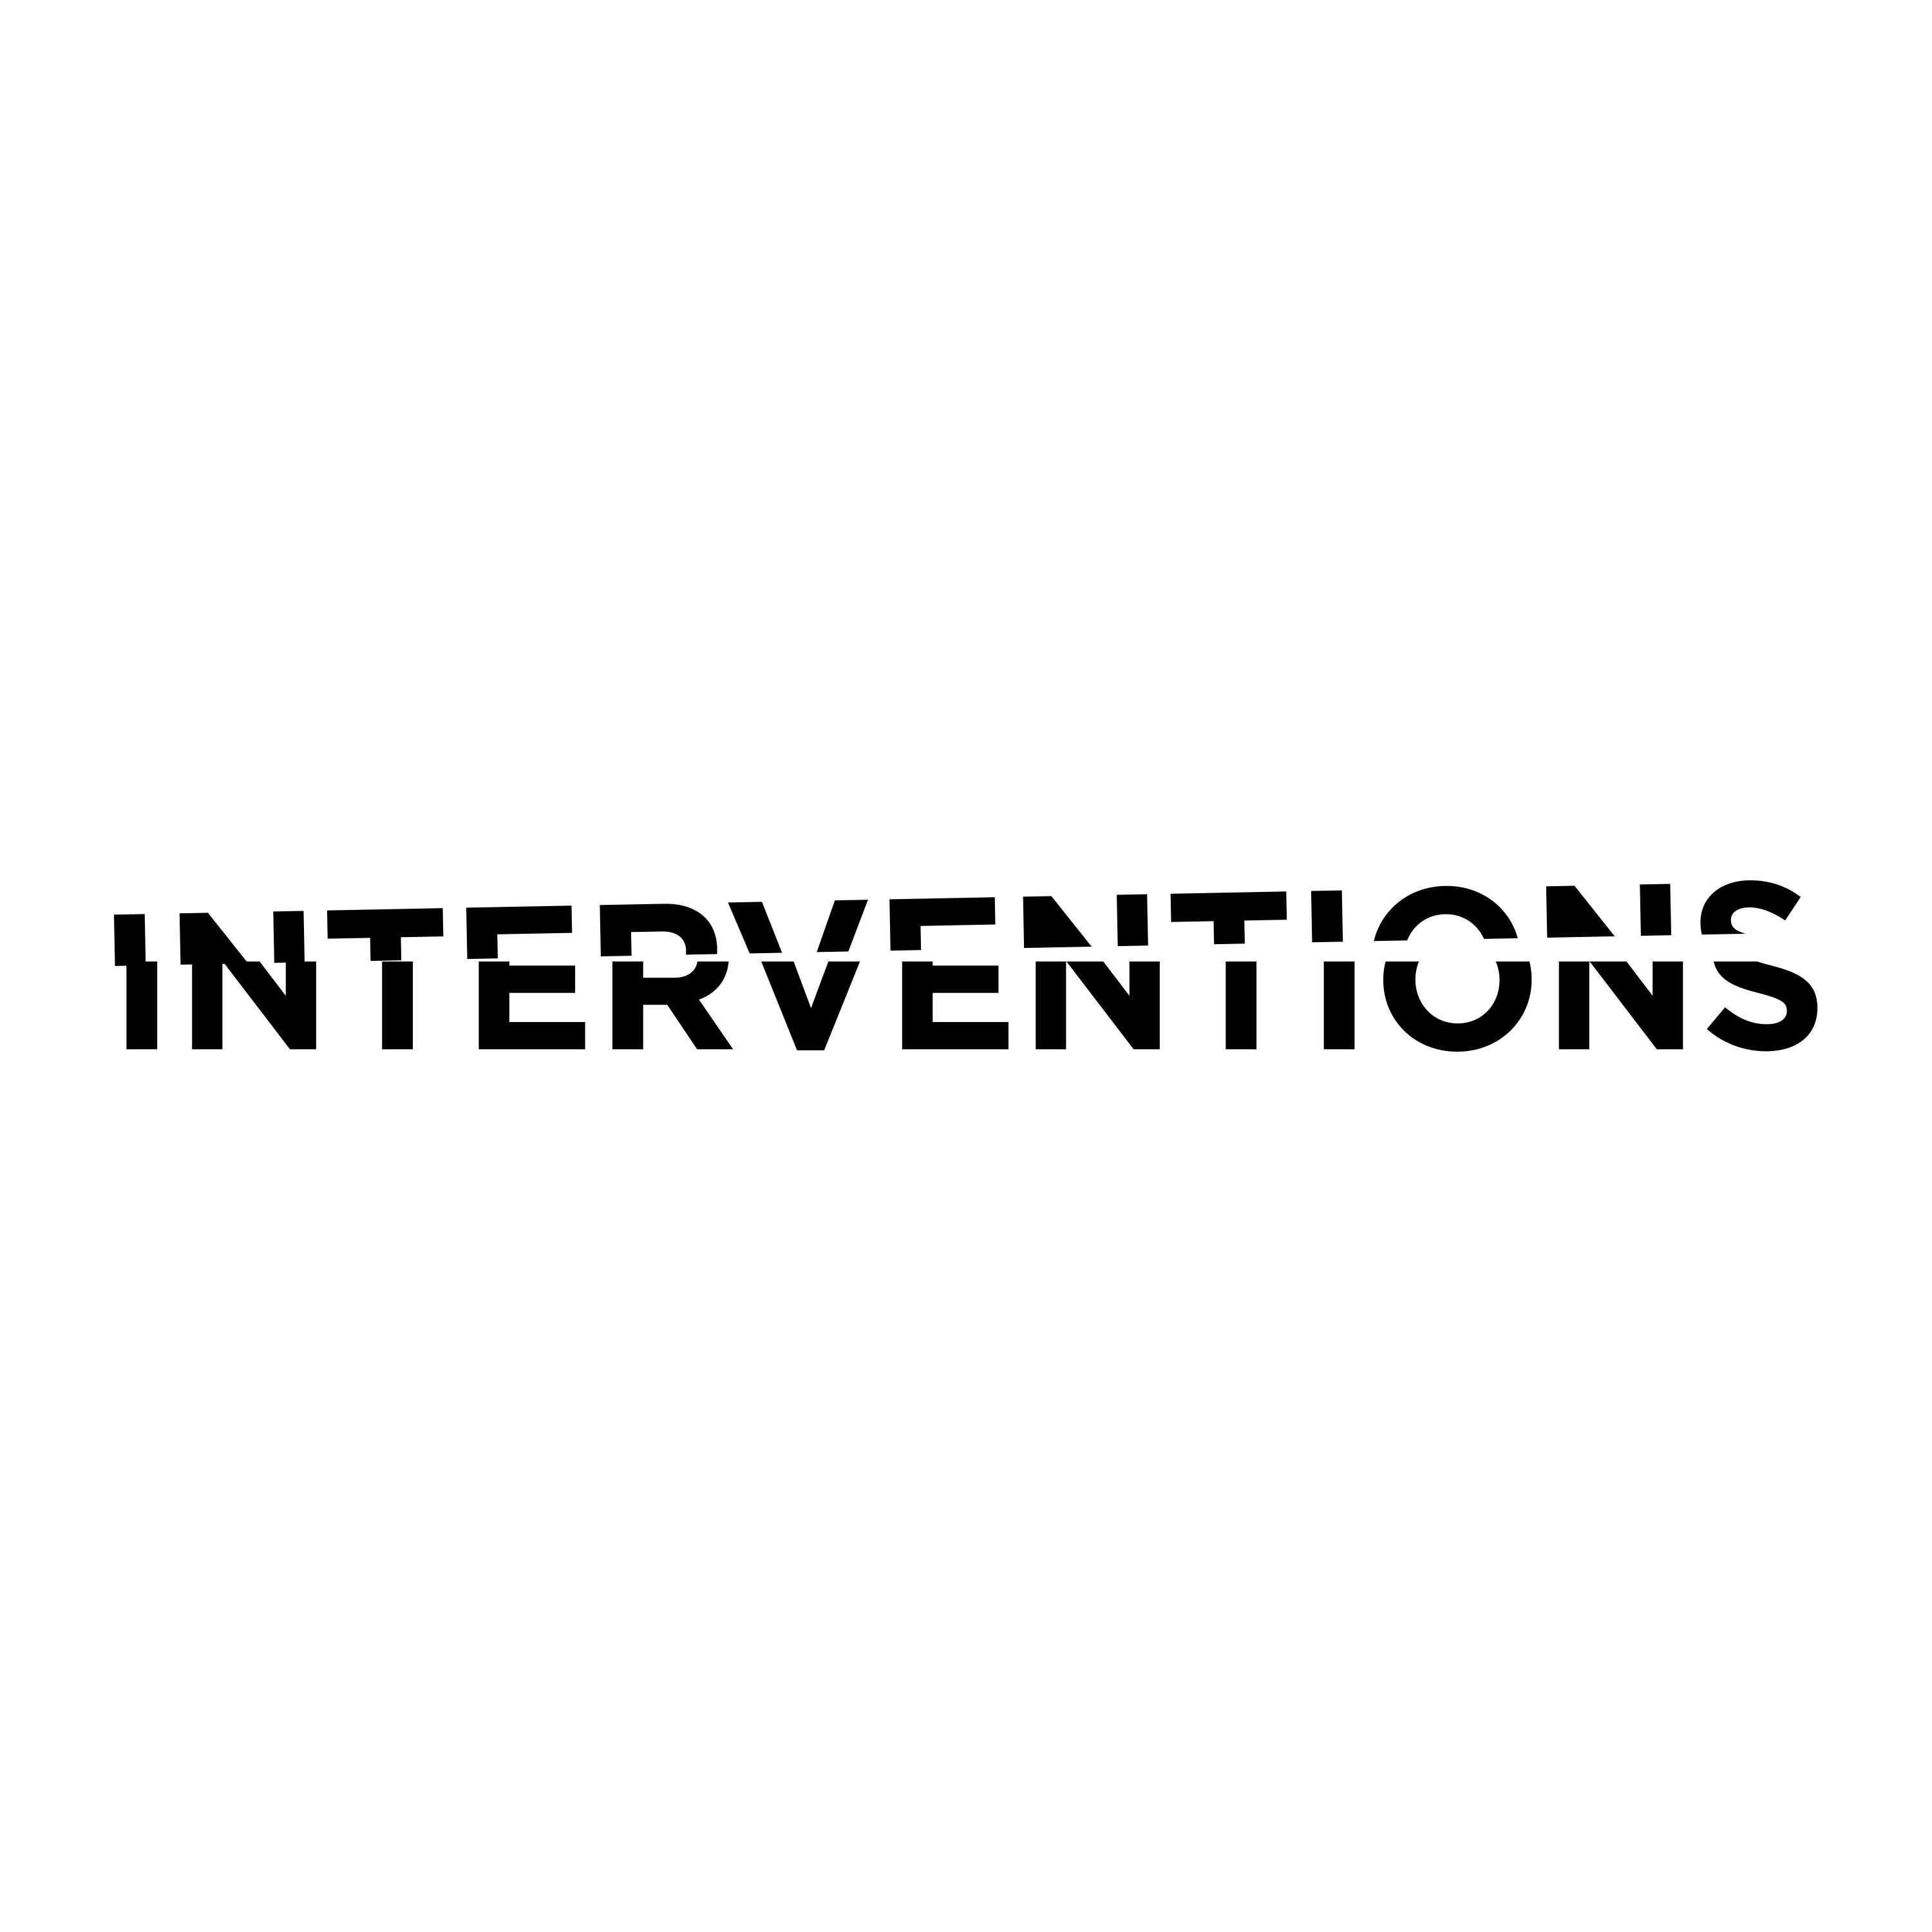 Interventions: Coming Soon